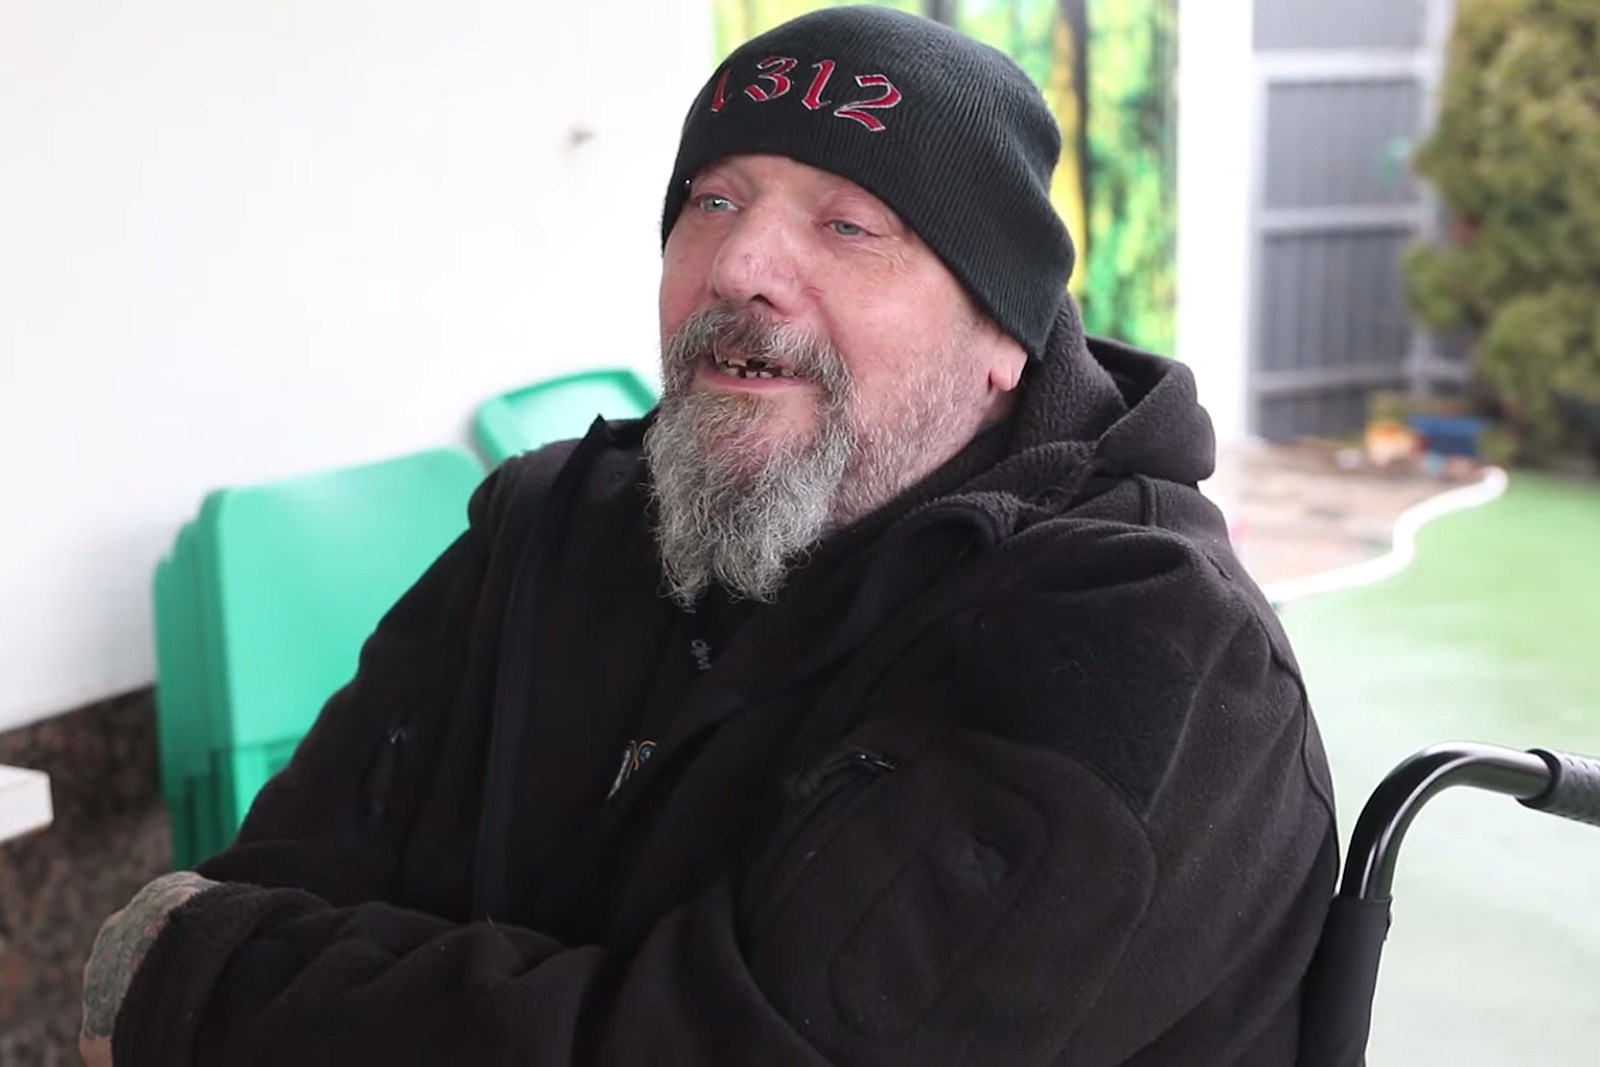 Former Iron Maiden Singer Paul Di'Anno: Sepsis 'Almost Killed Me'